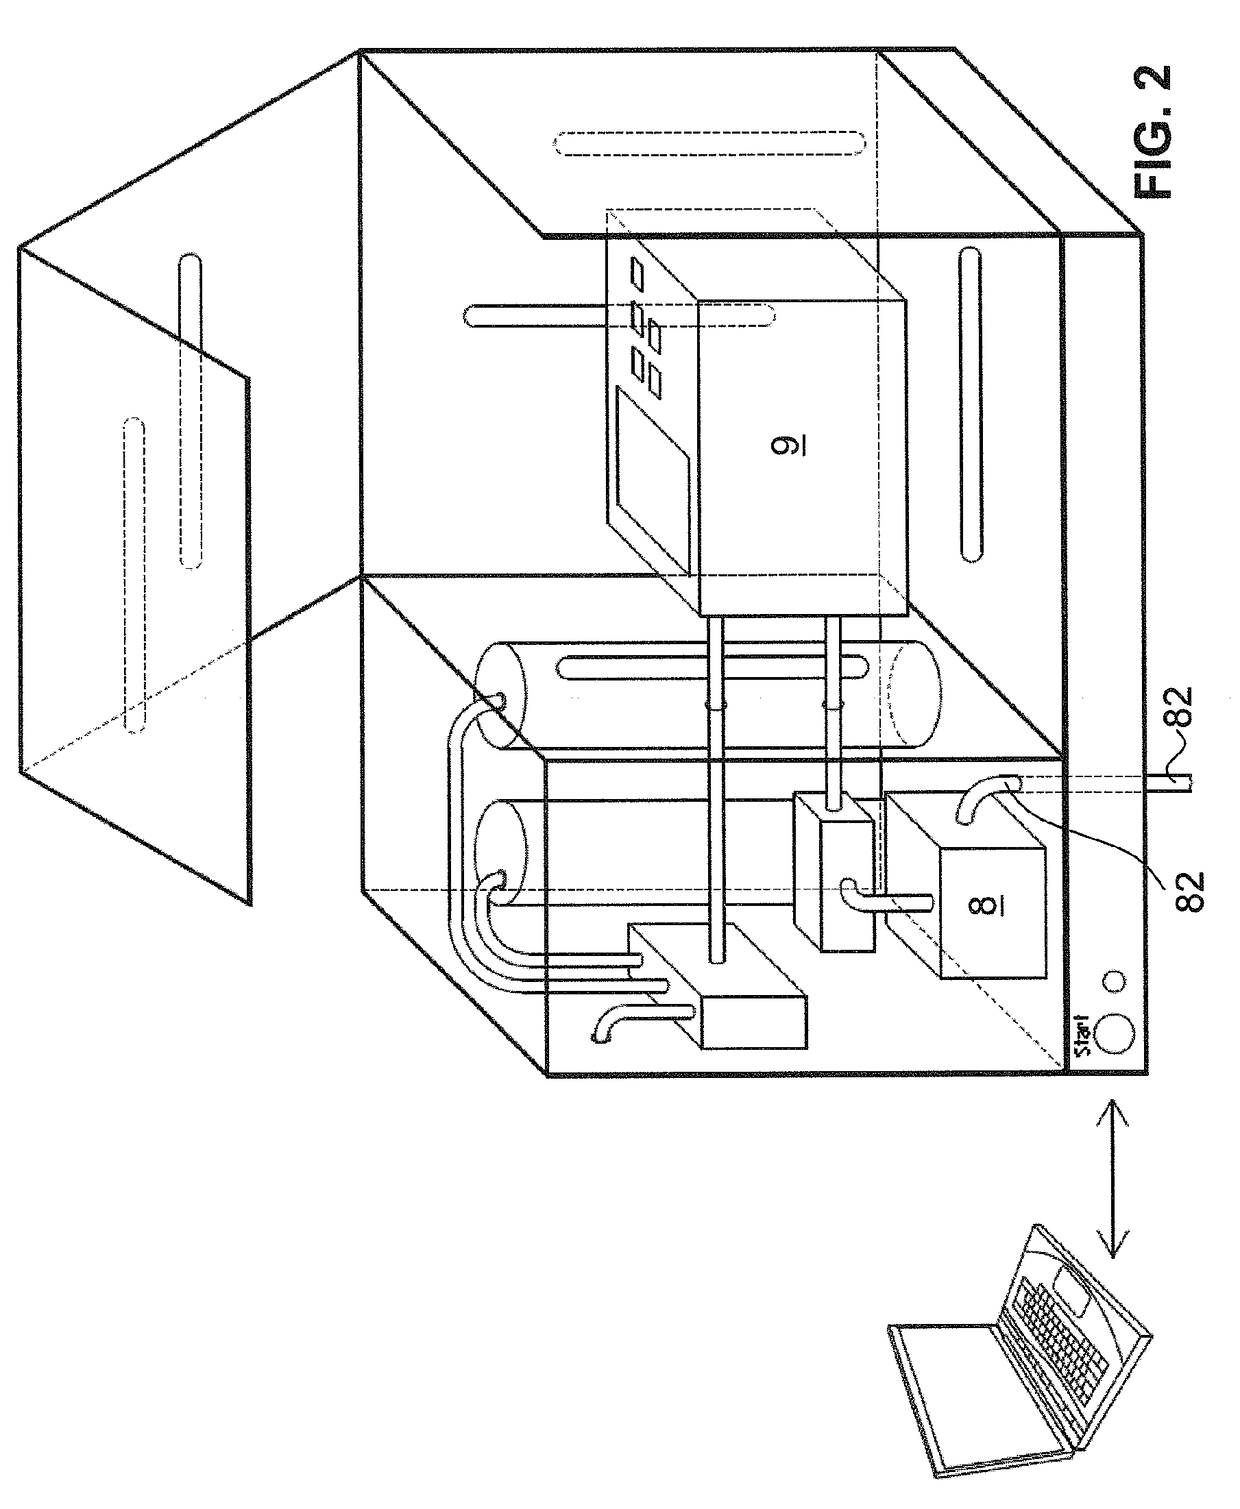 Device for cleaning a medical vacuum pump